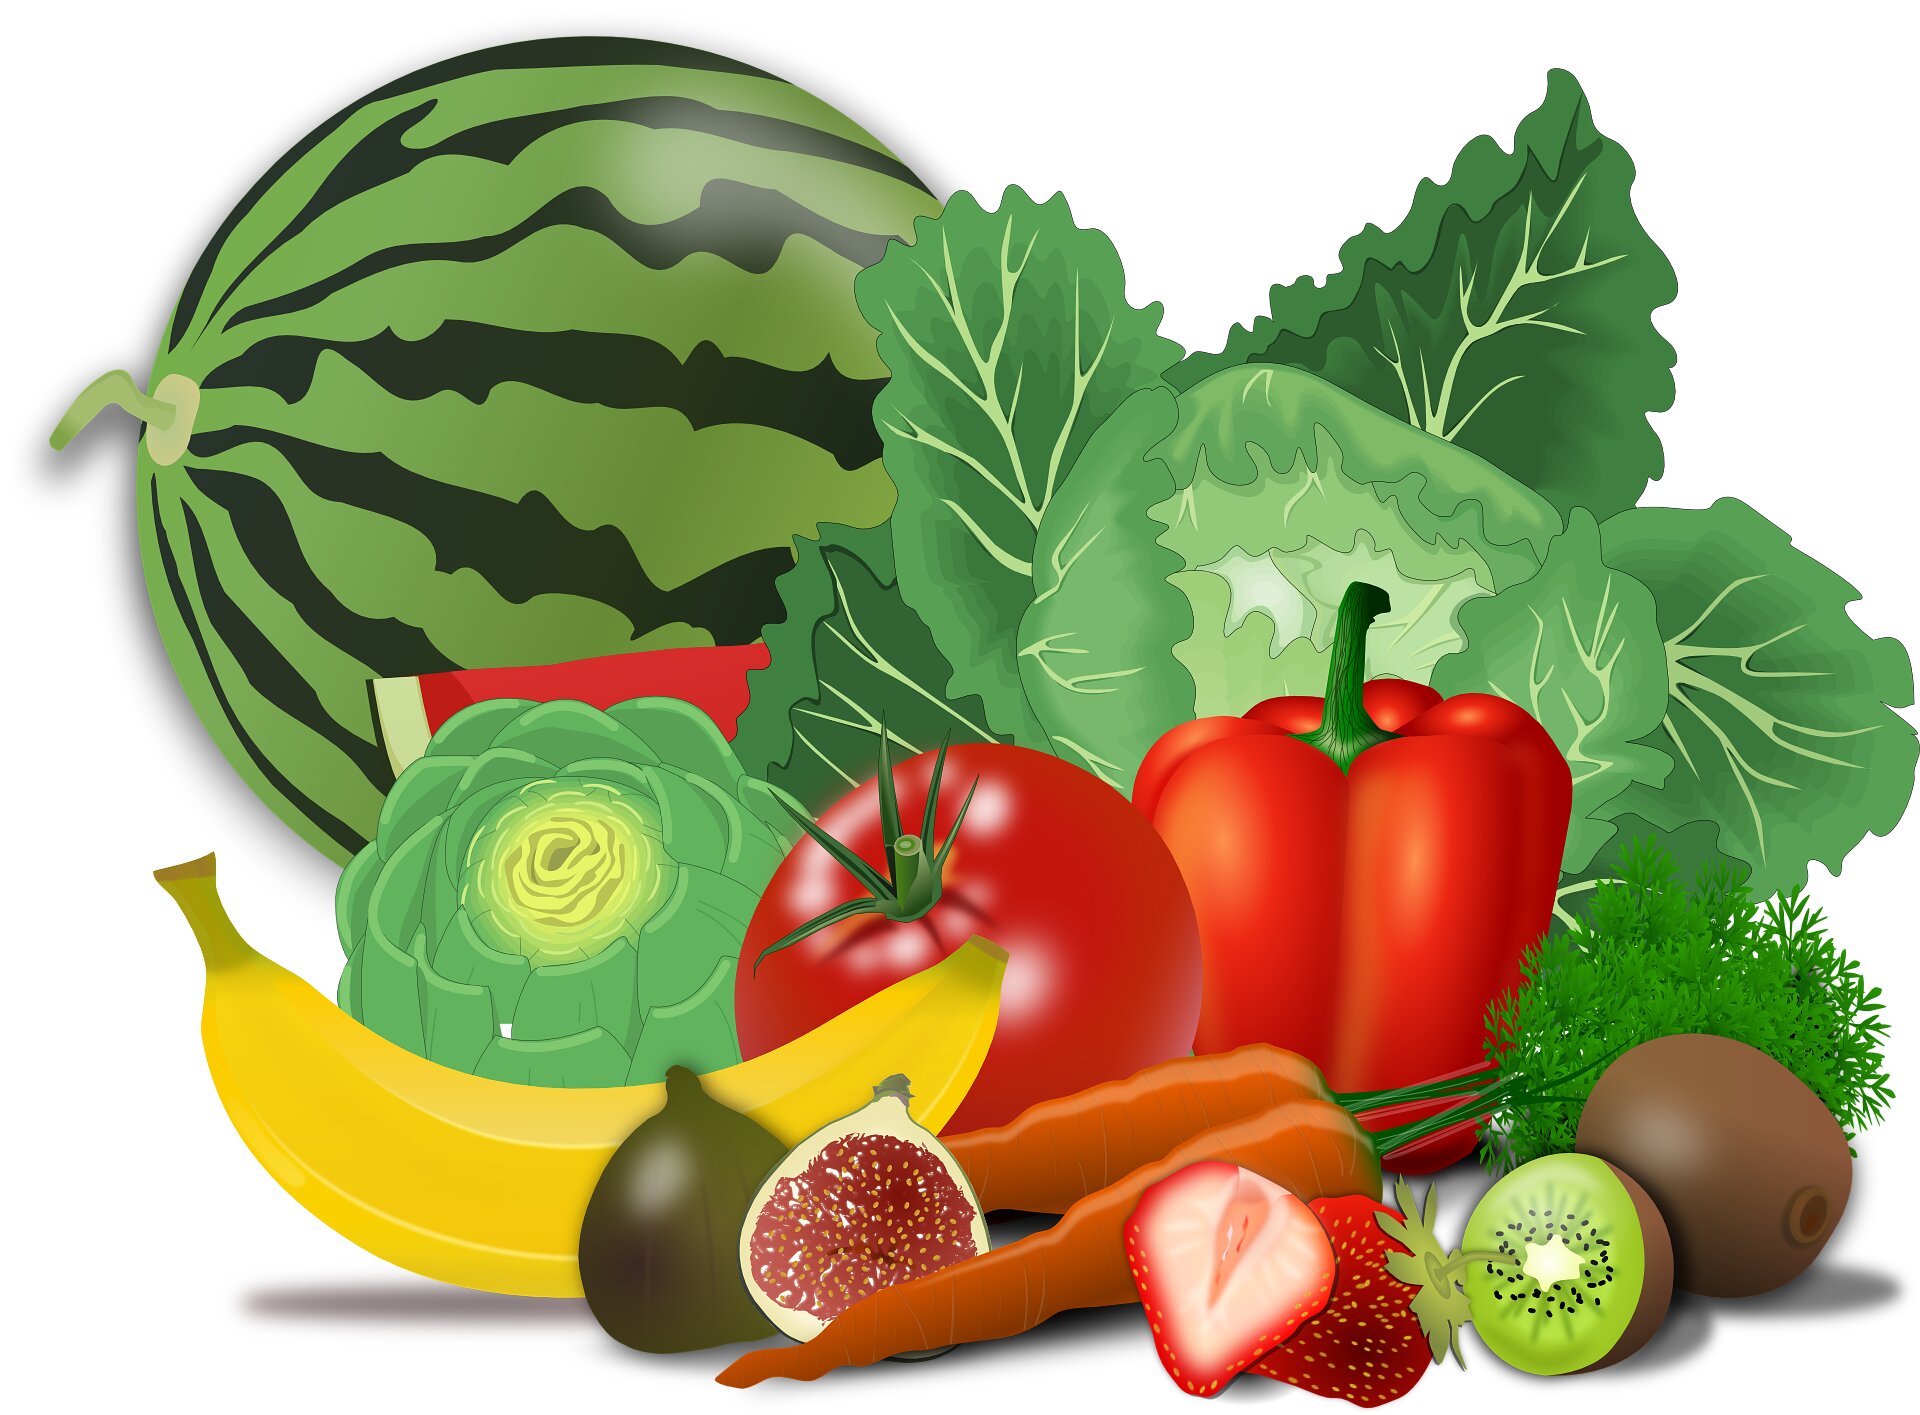 Prescriptions for fruits and vegetables can improve the health of people with diabetes and other ailments